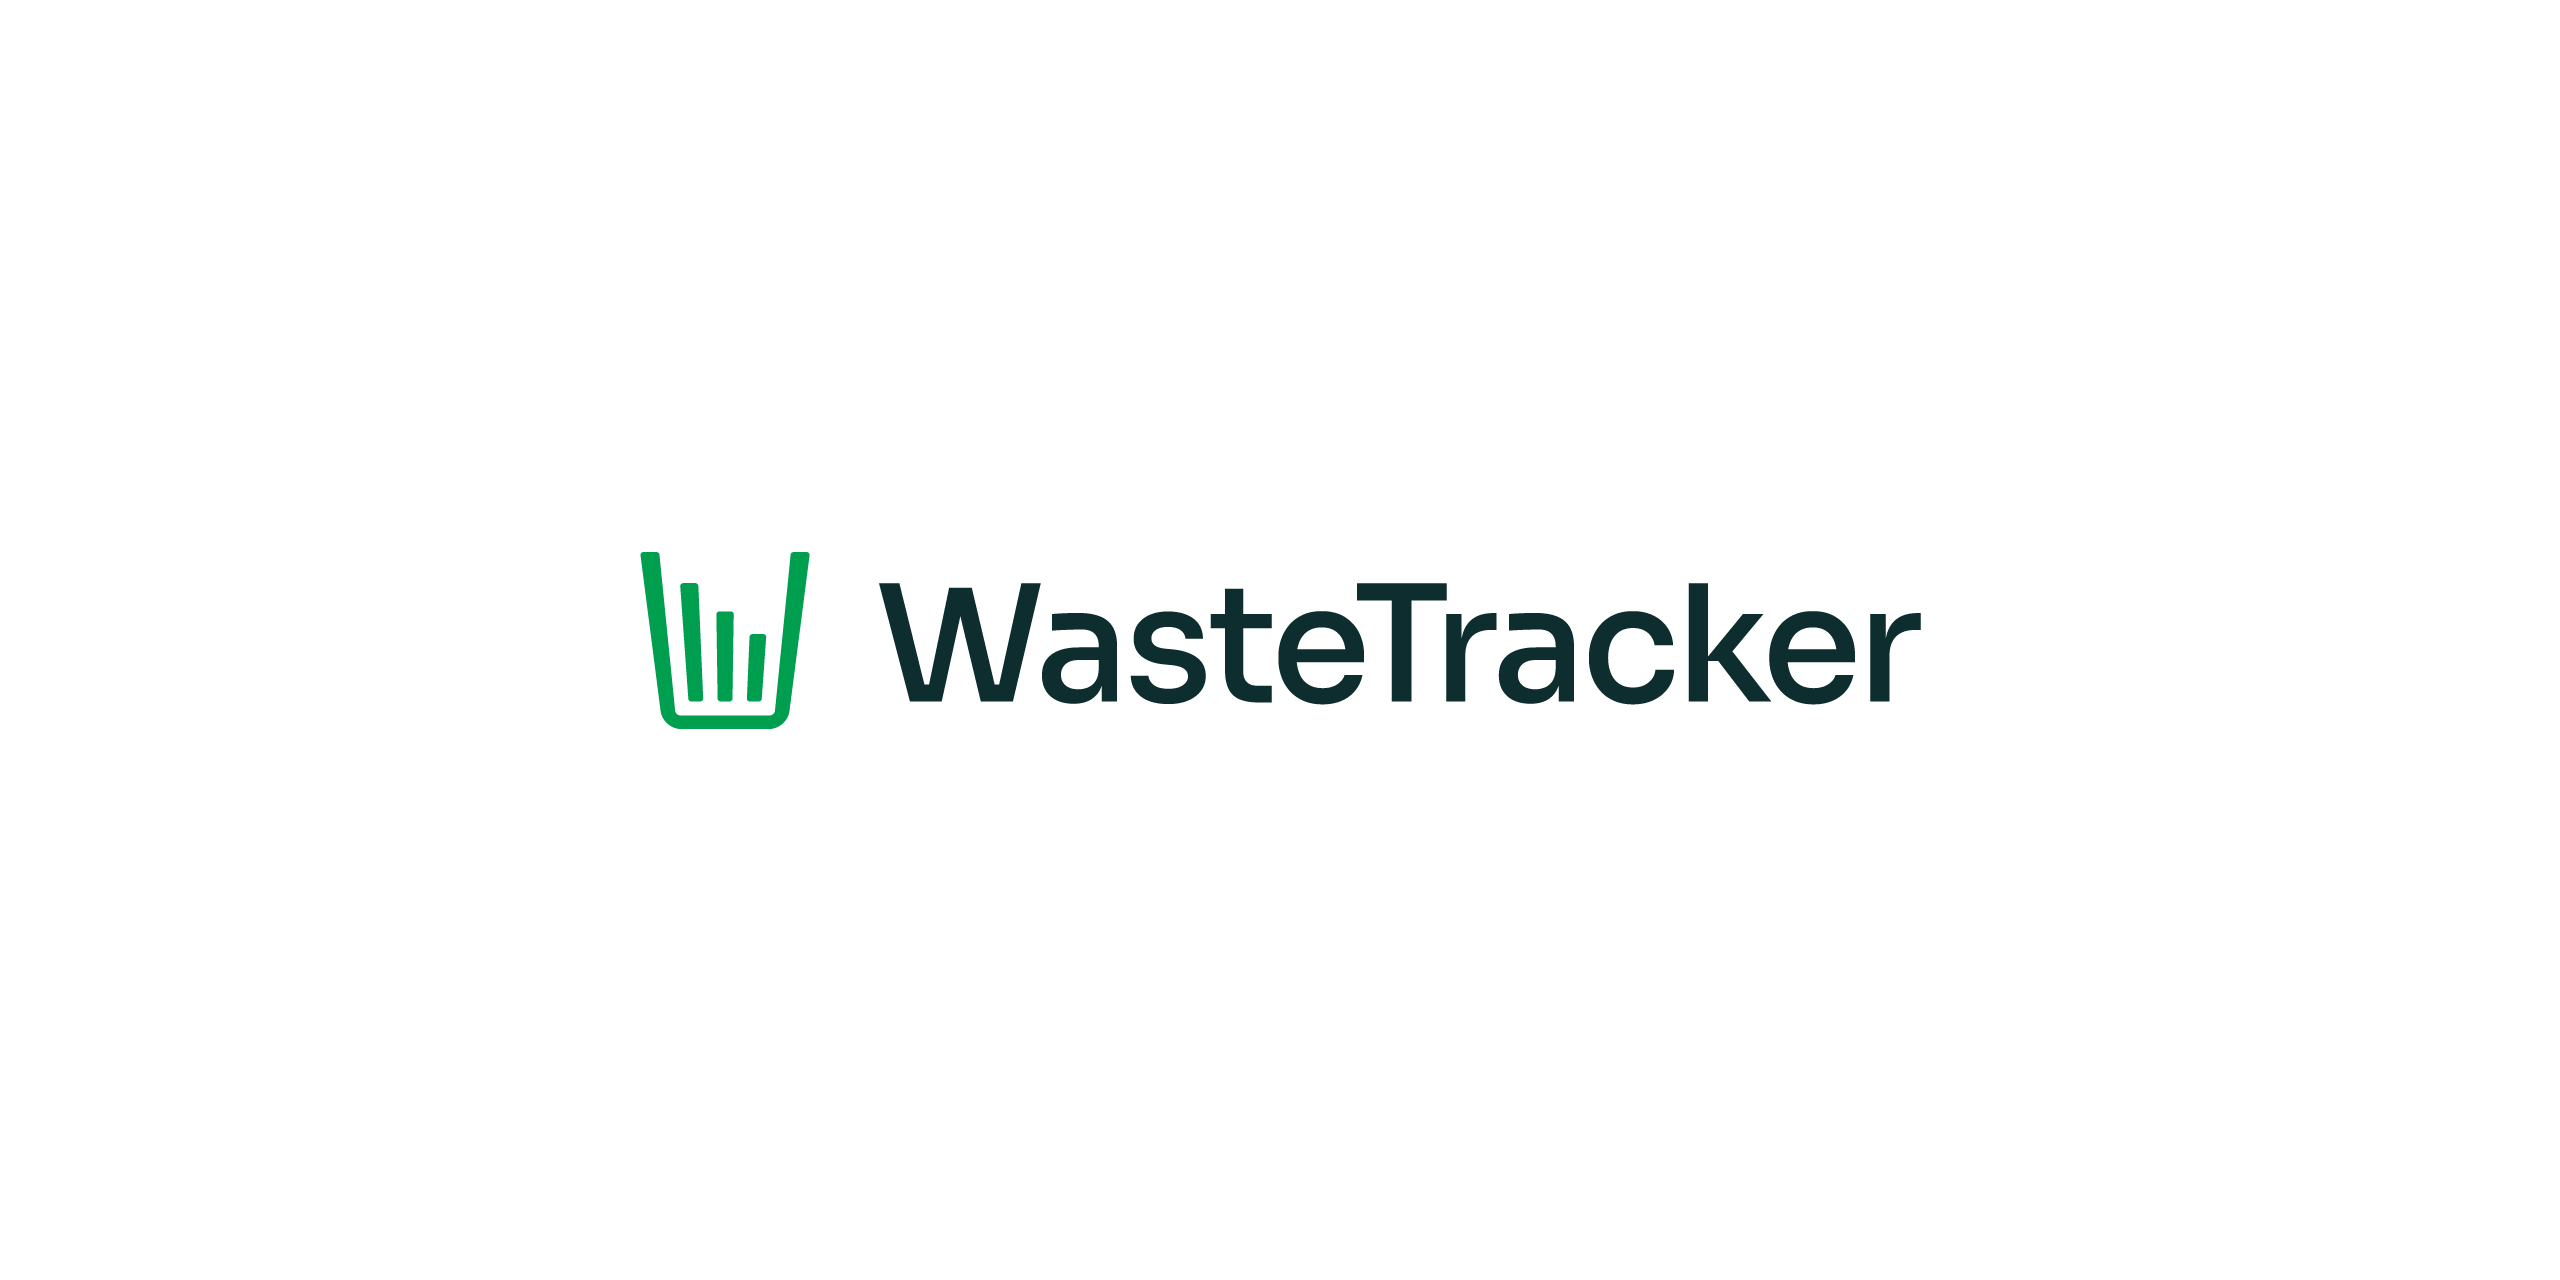 WasteTracker logo on a white background, showcasing its versatility in different settings.